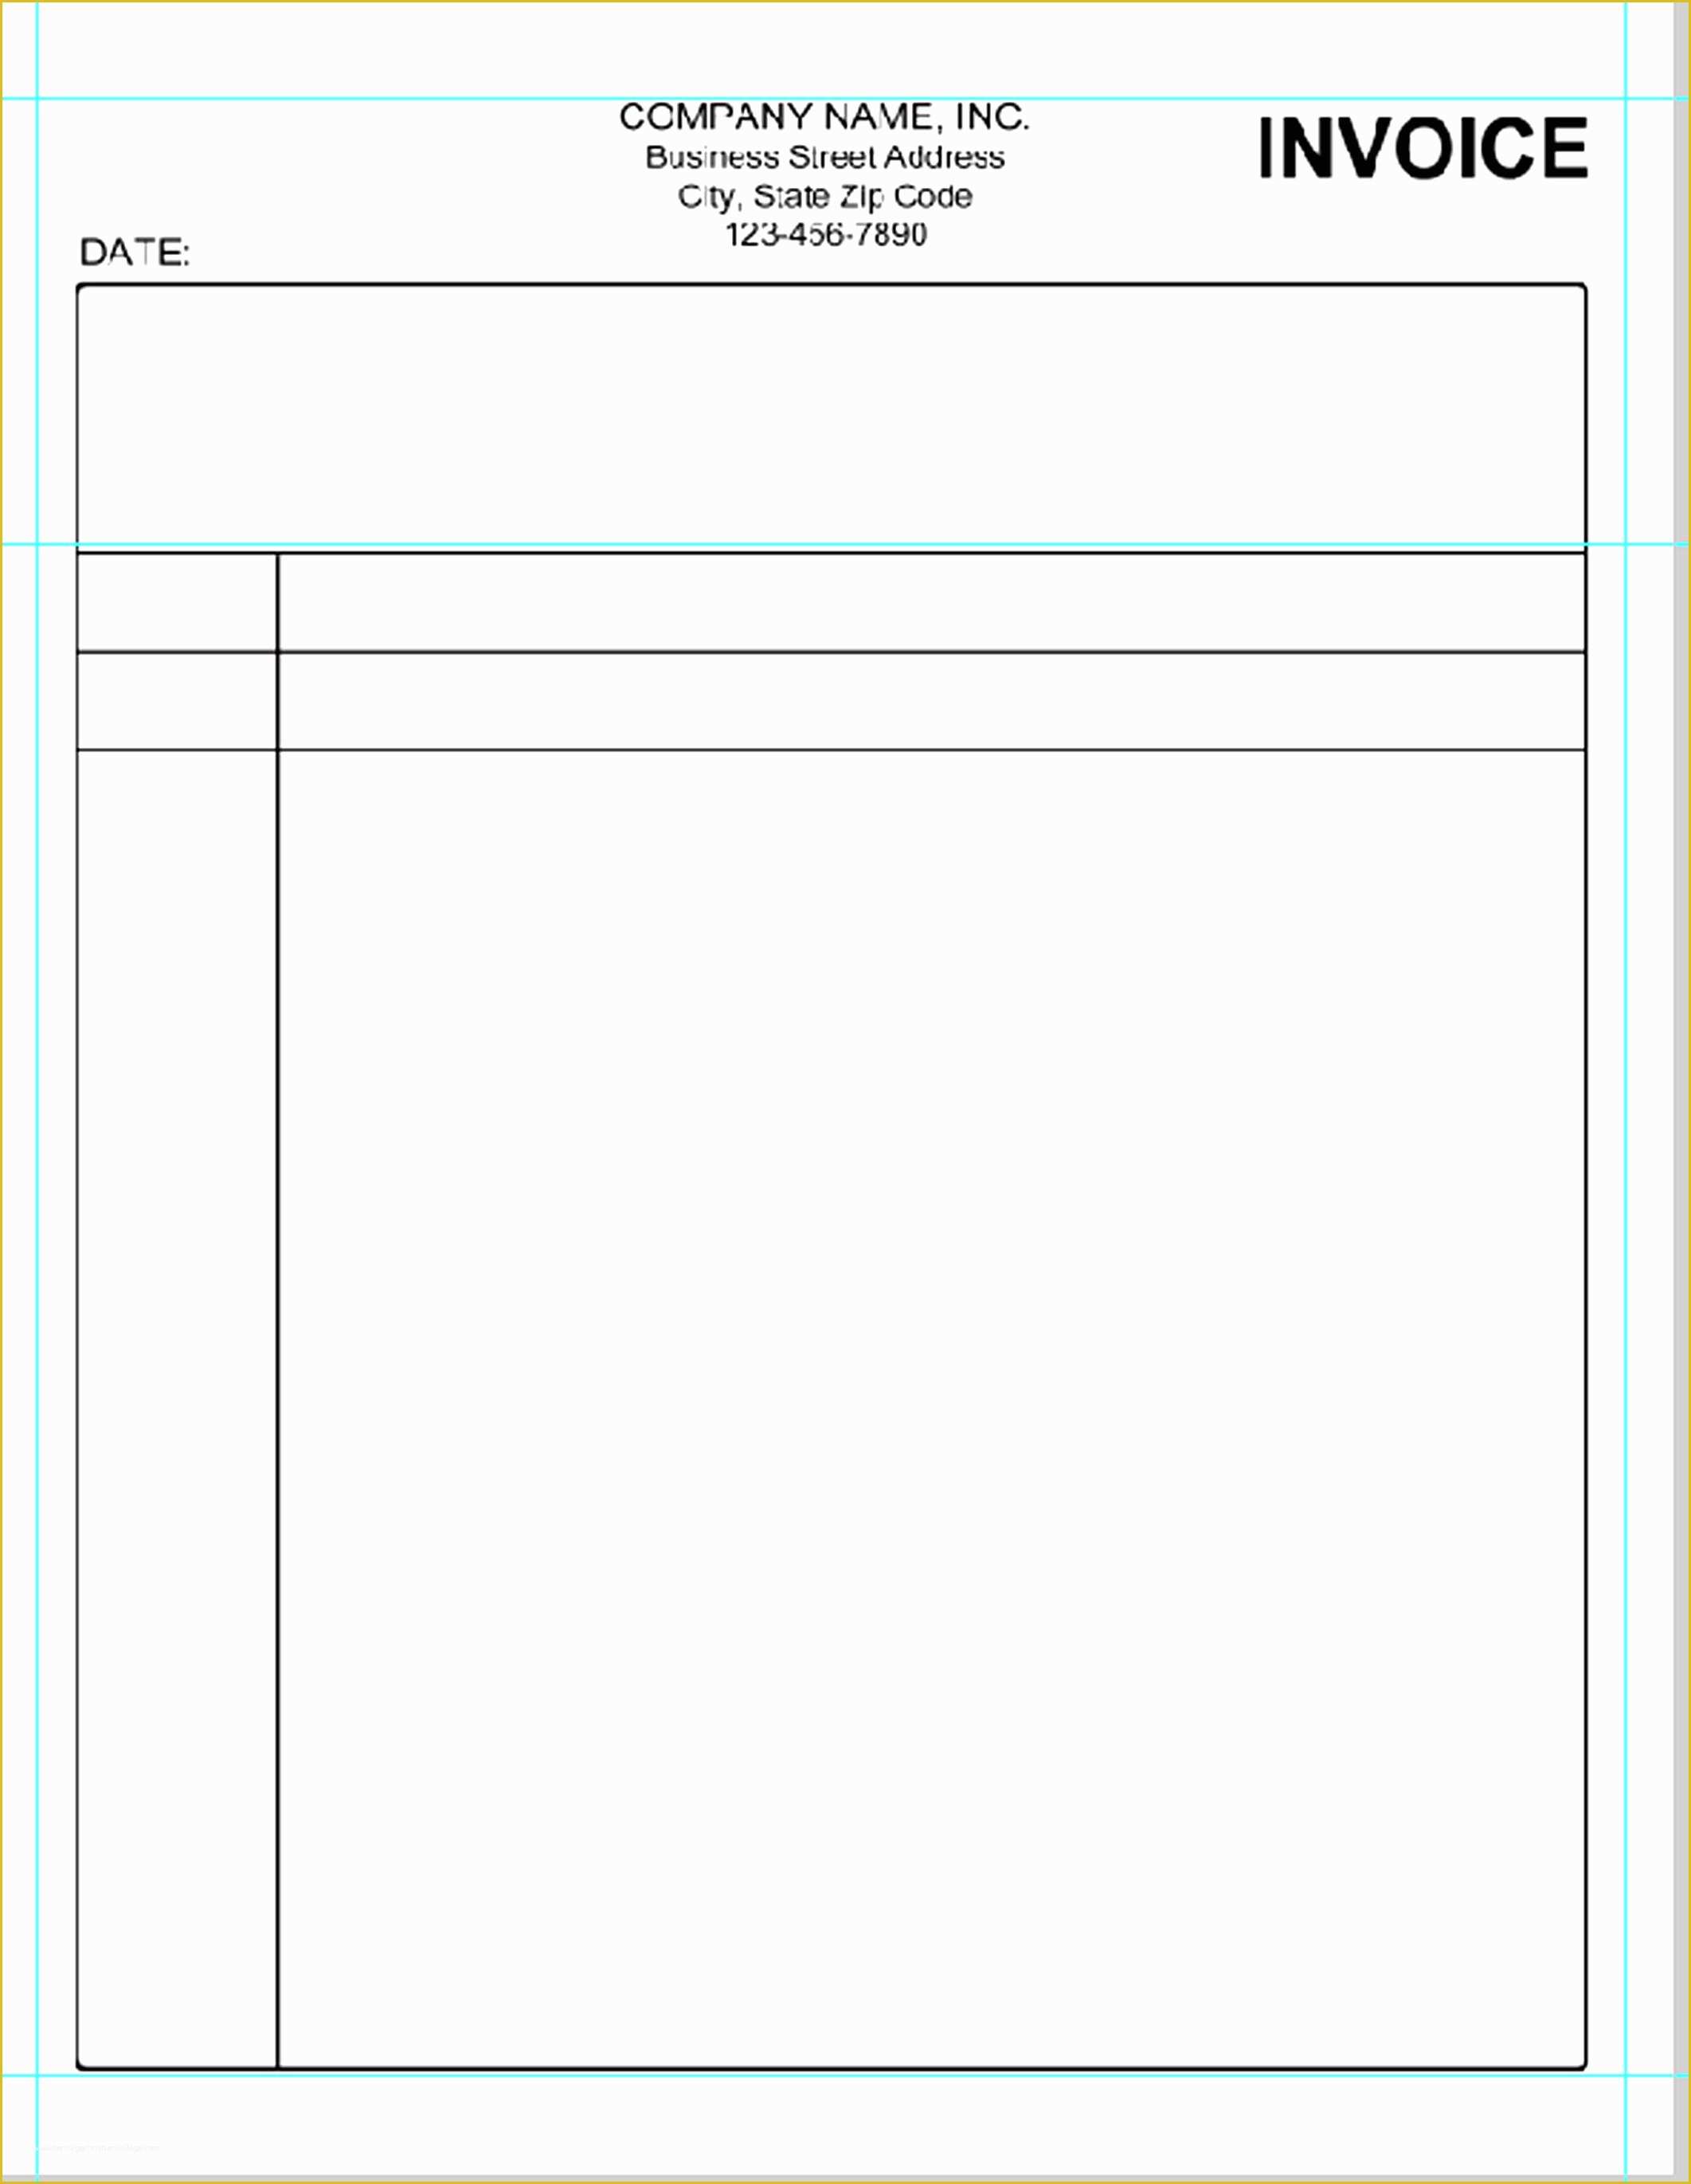 Free Receipt Template Of Blank Receipt Example Mughals